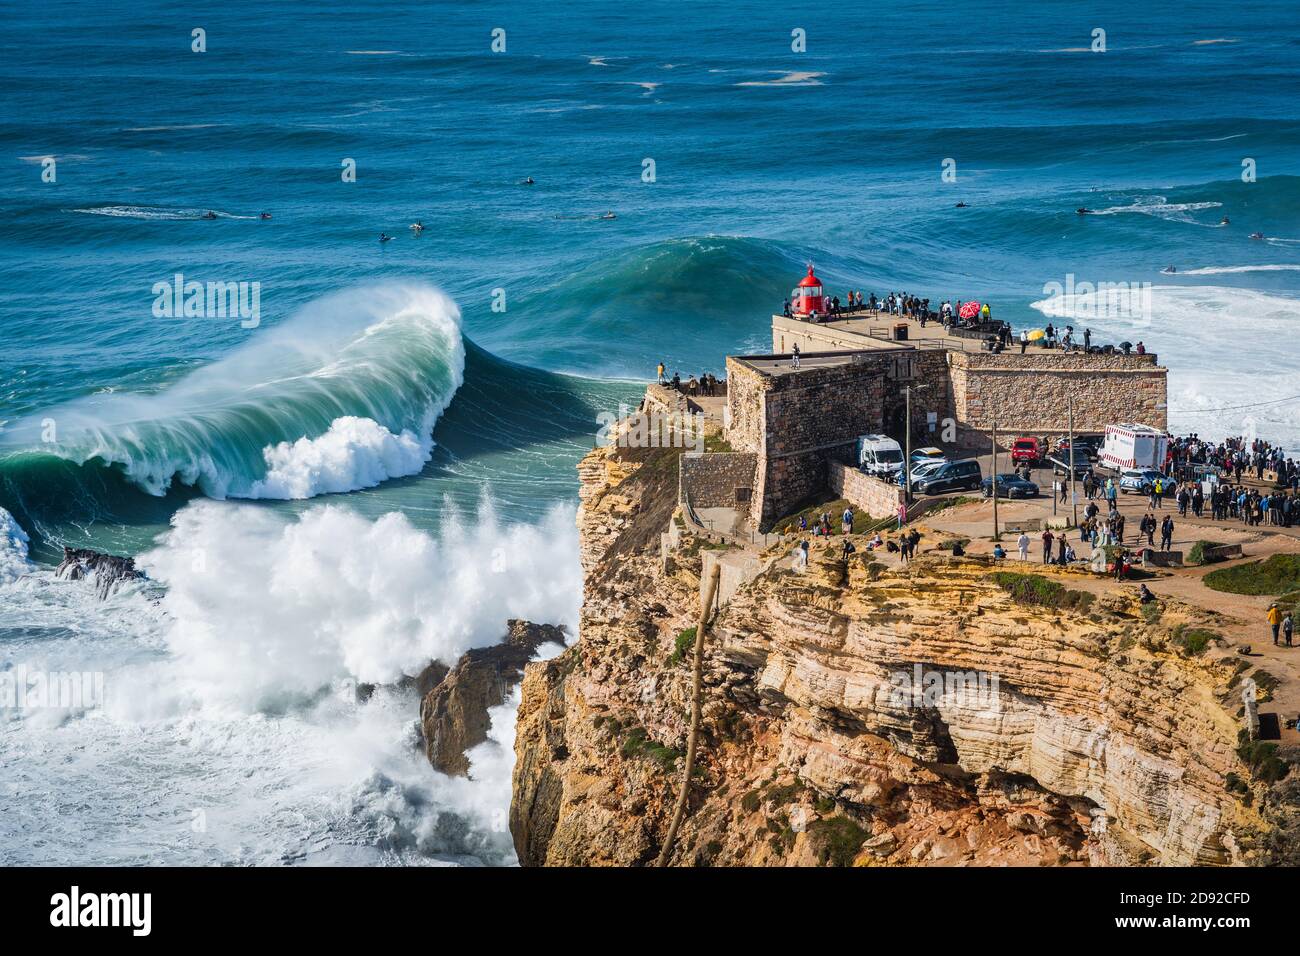 Big waves crashing near the Fort of Nazare Lighthouse in Nazare, Portugal. Nazare is famously known for having the largest waves in the world. Stock Photo